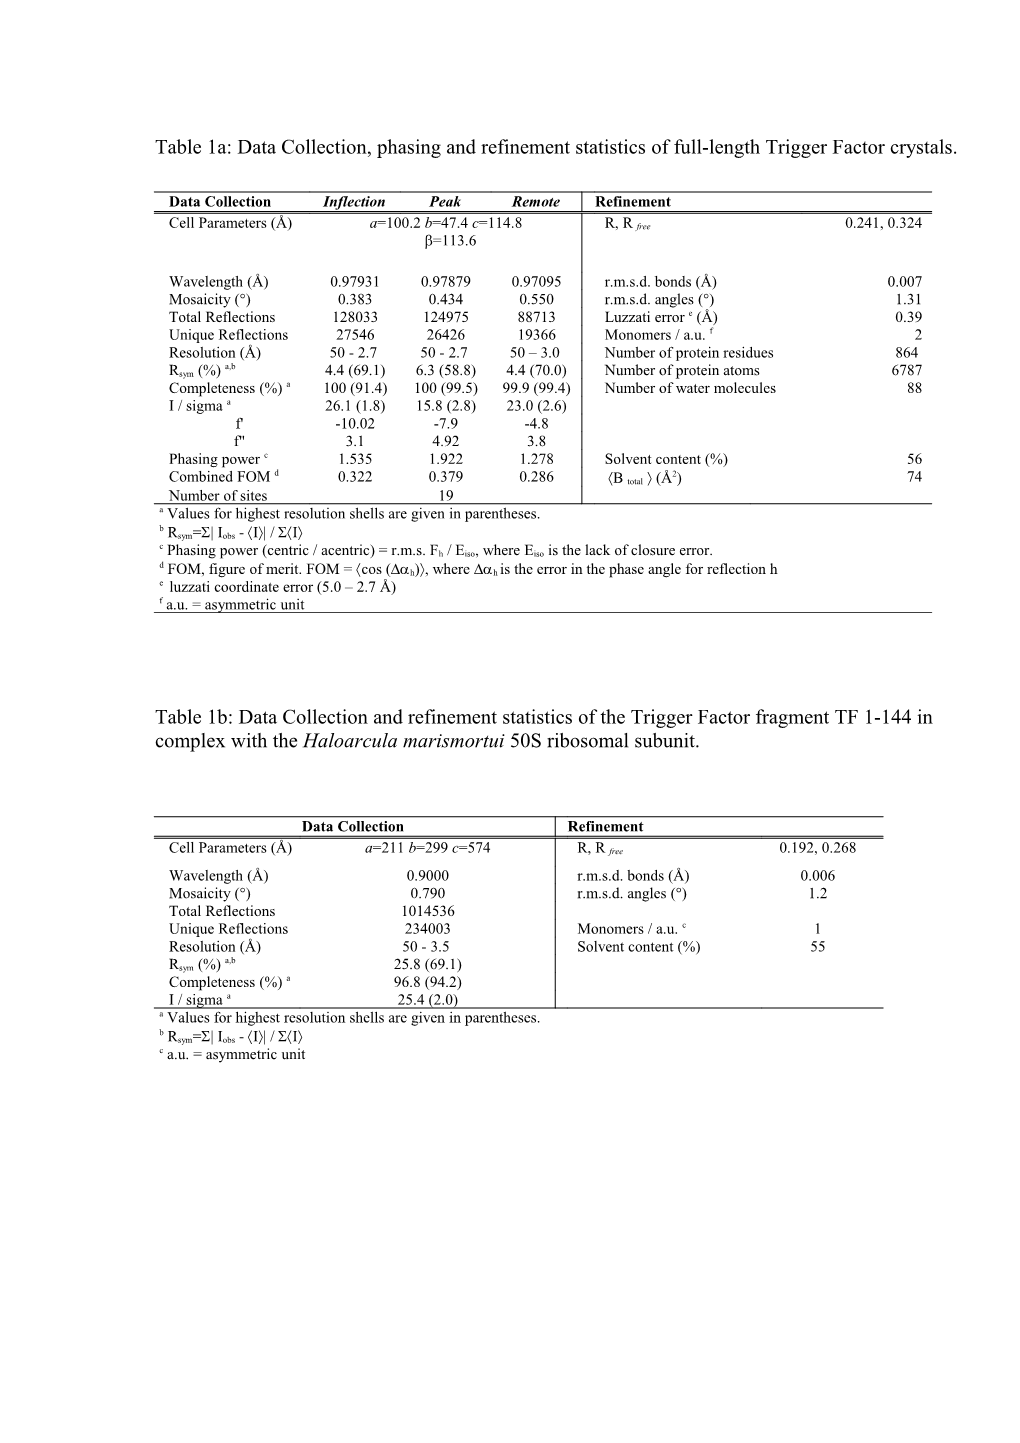 Table 1A: Data Collection, Phasing and Refinement Statistics of Full-Length Trigger Factor